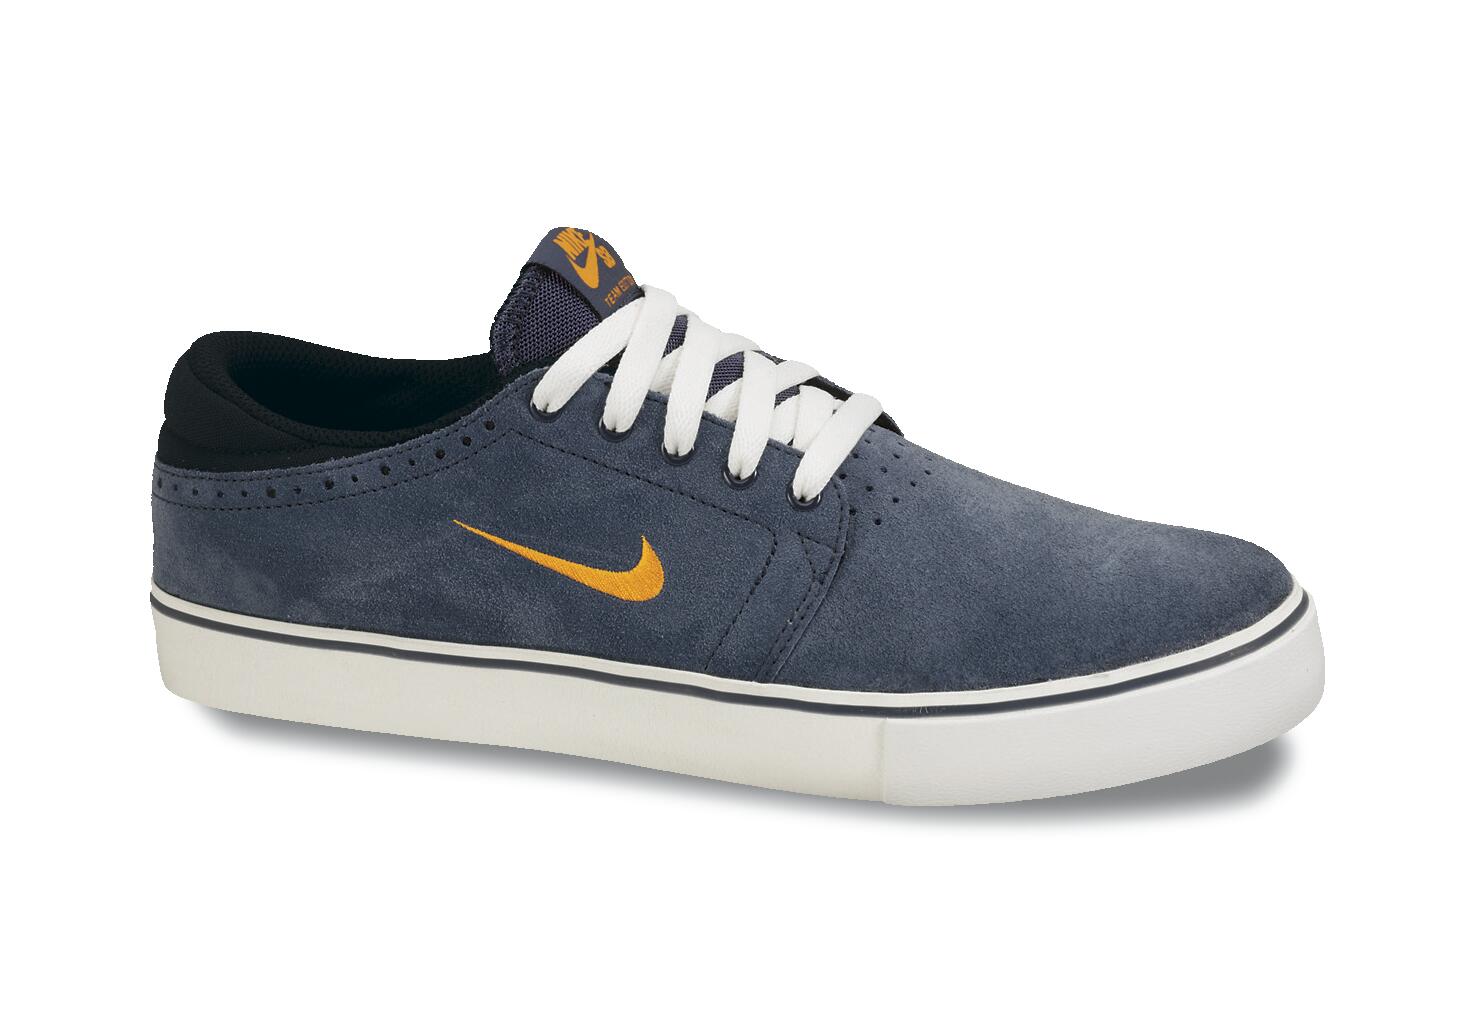 NIKE SB on "Sneak Peek! A proper Team Edition 2 in Squadron Blue, Gold and Sail. Coming in May from Nike SB. http://t.co/9CodjOZhOd" / Twitter